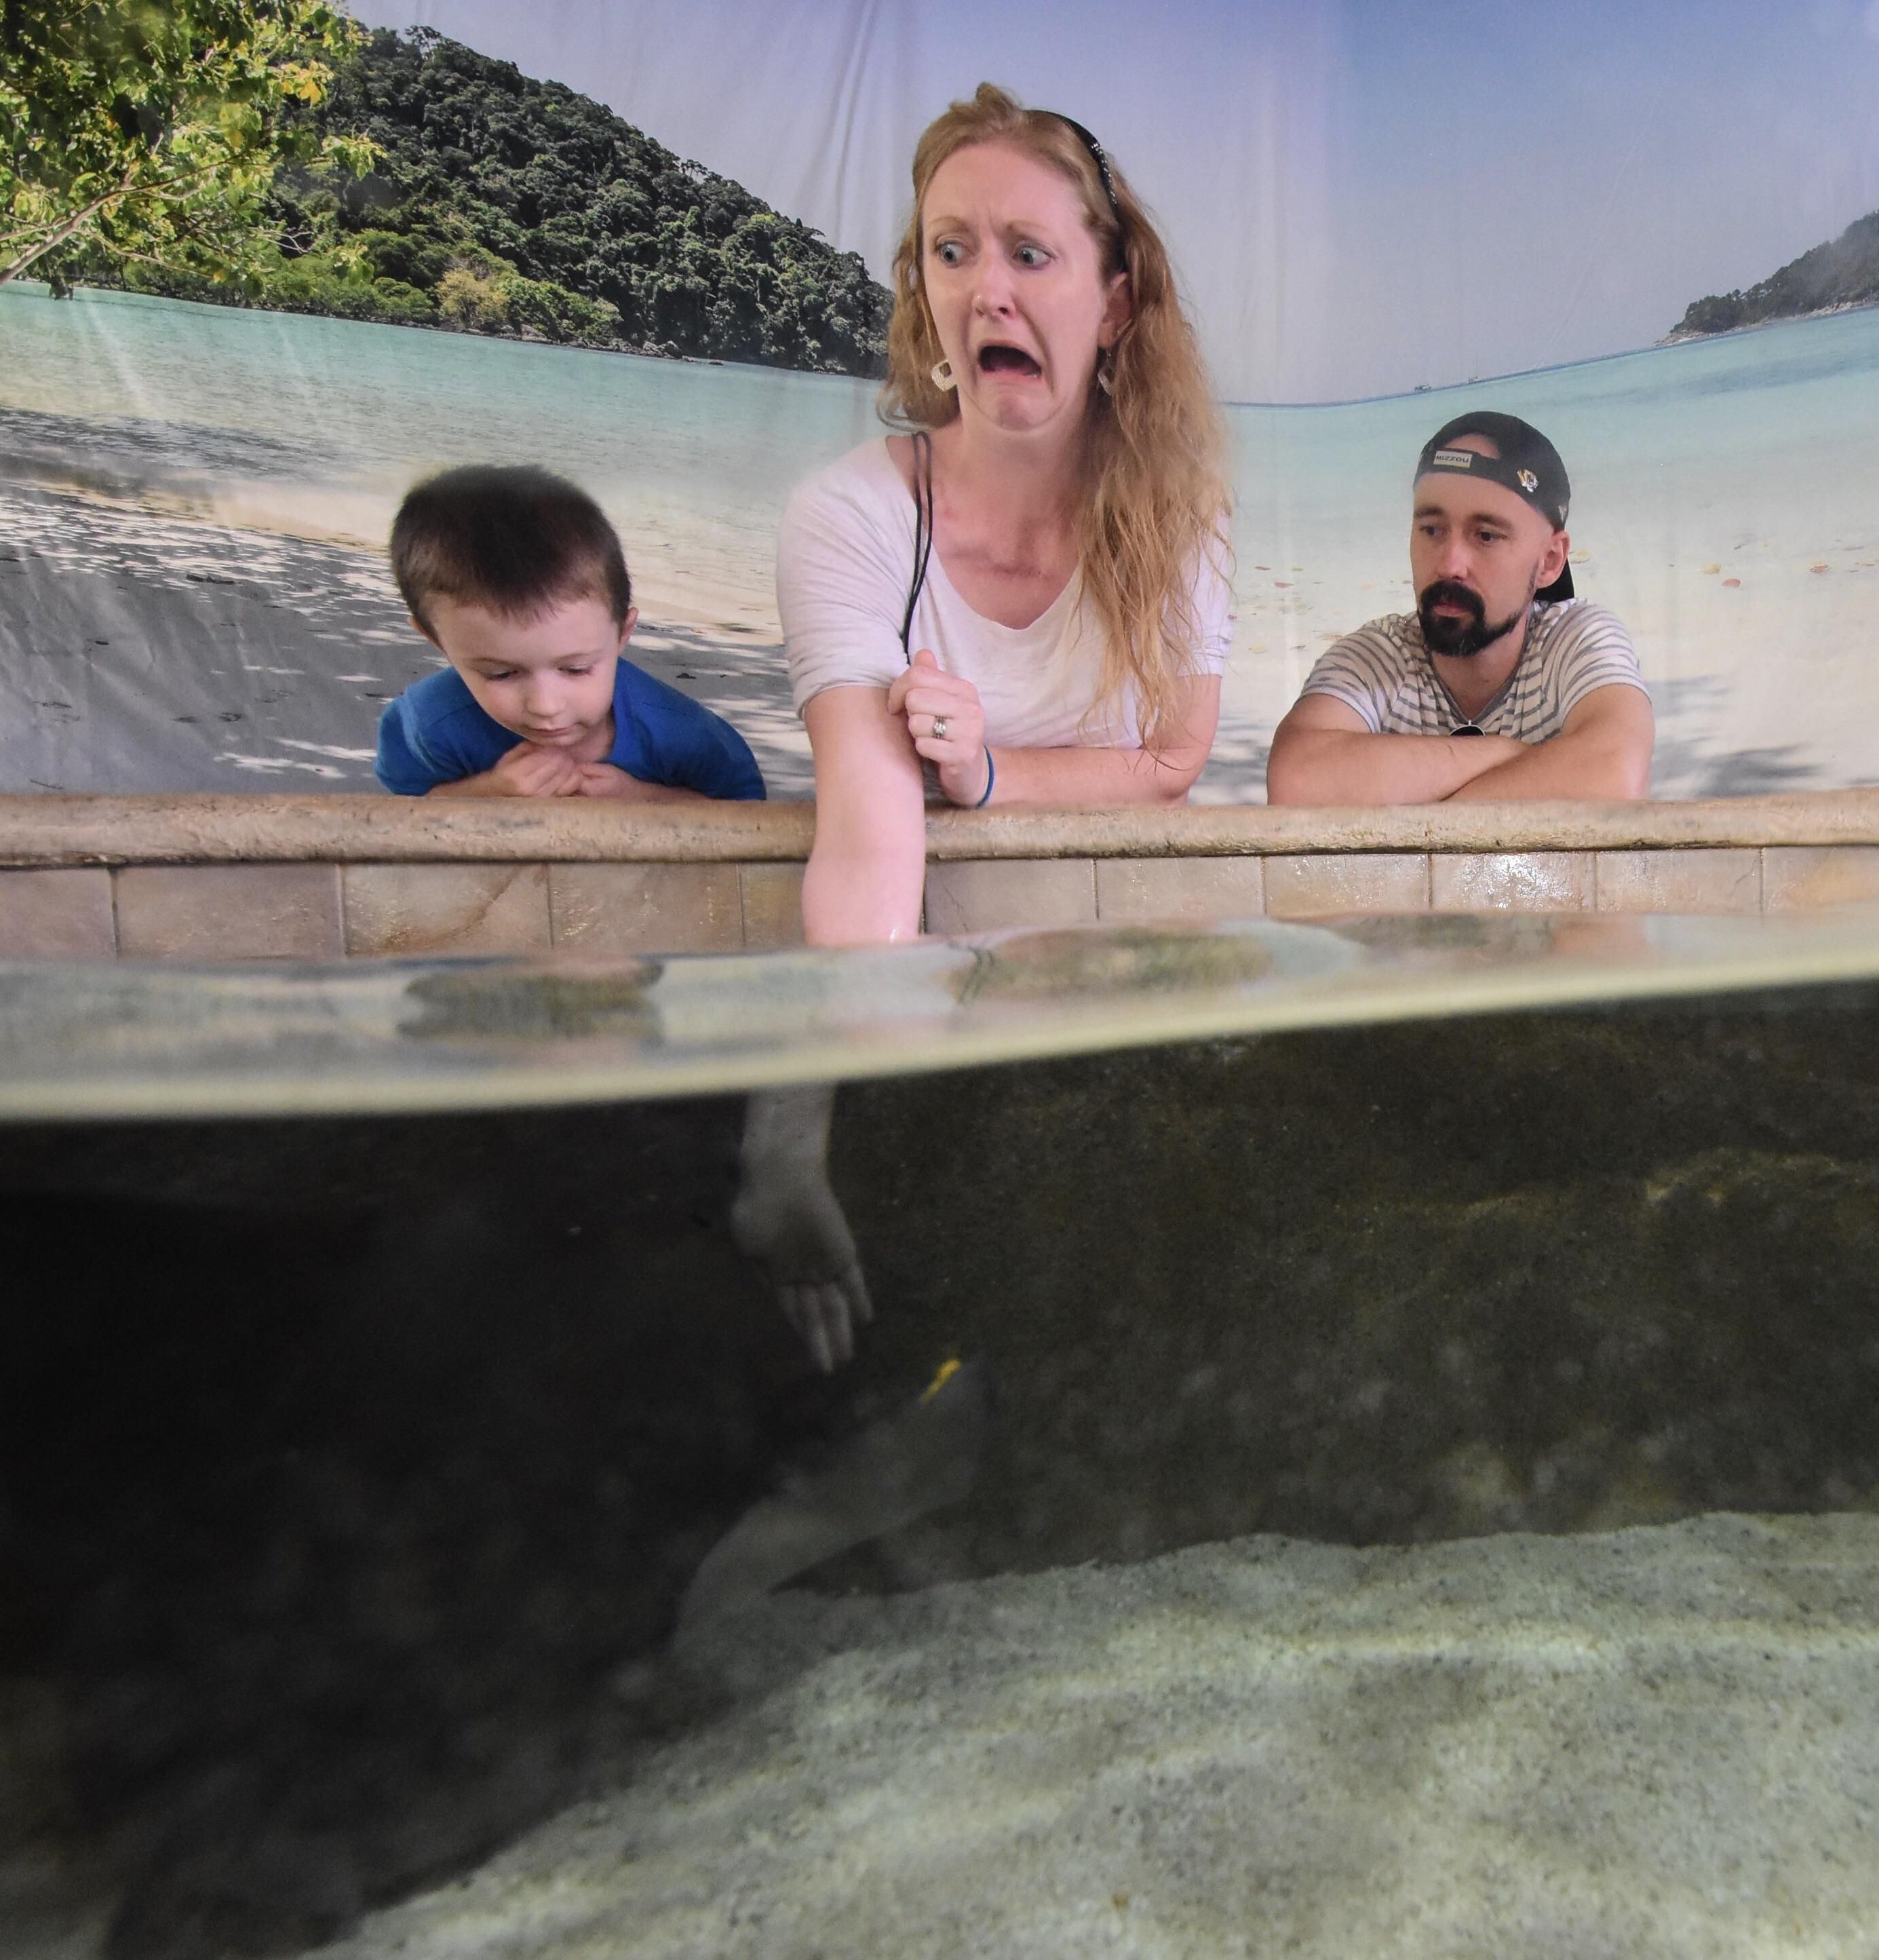 I think my wife wasn't quite prepared for the sting ray to take the food form her hand.